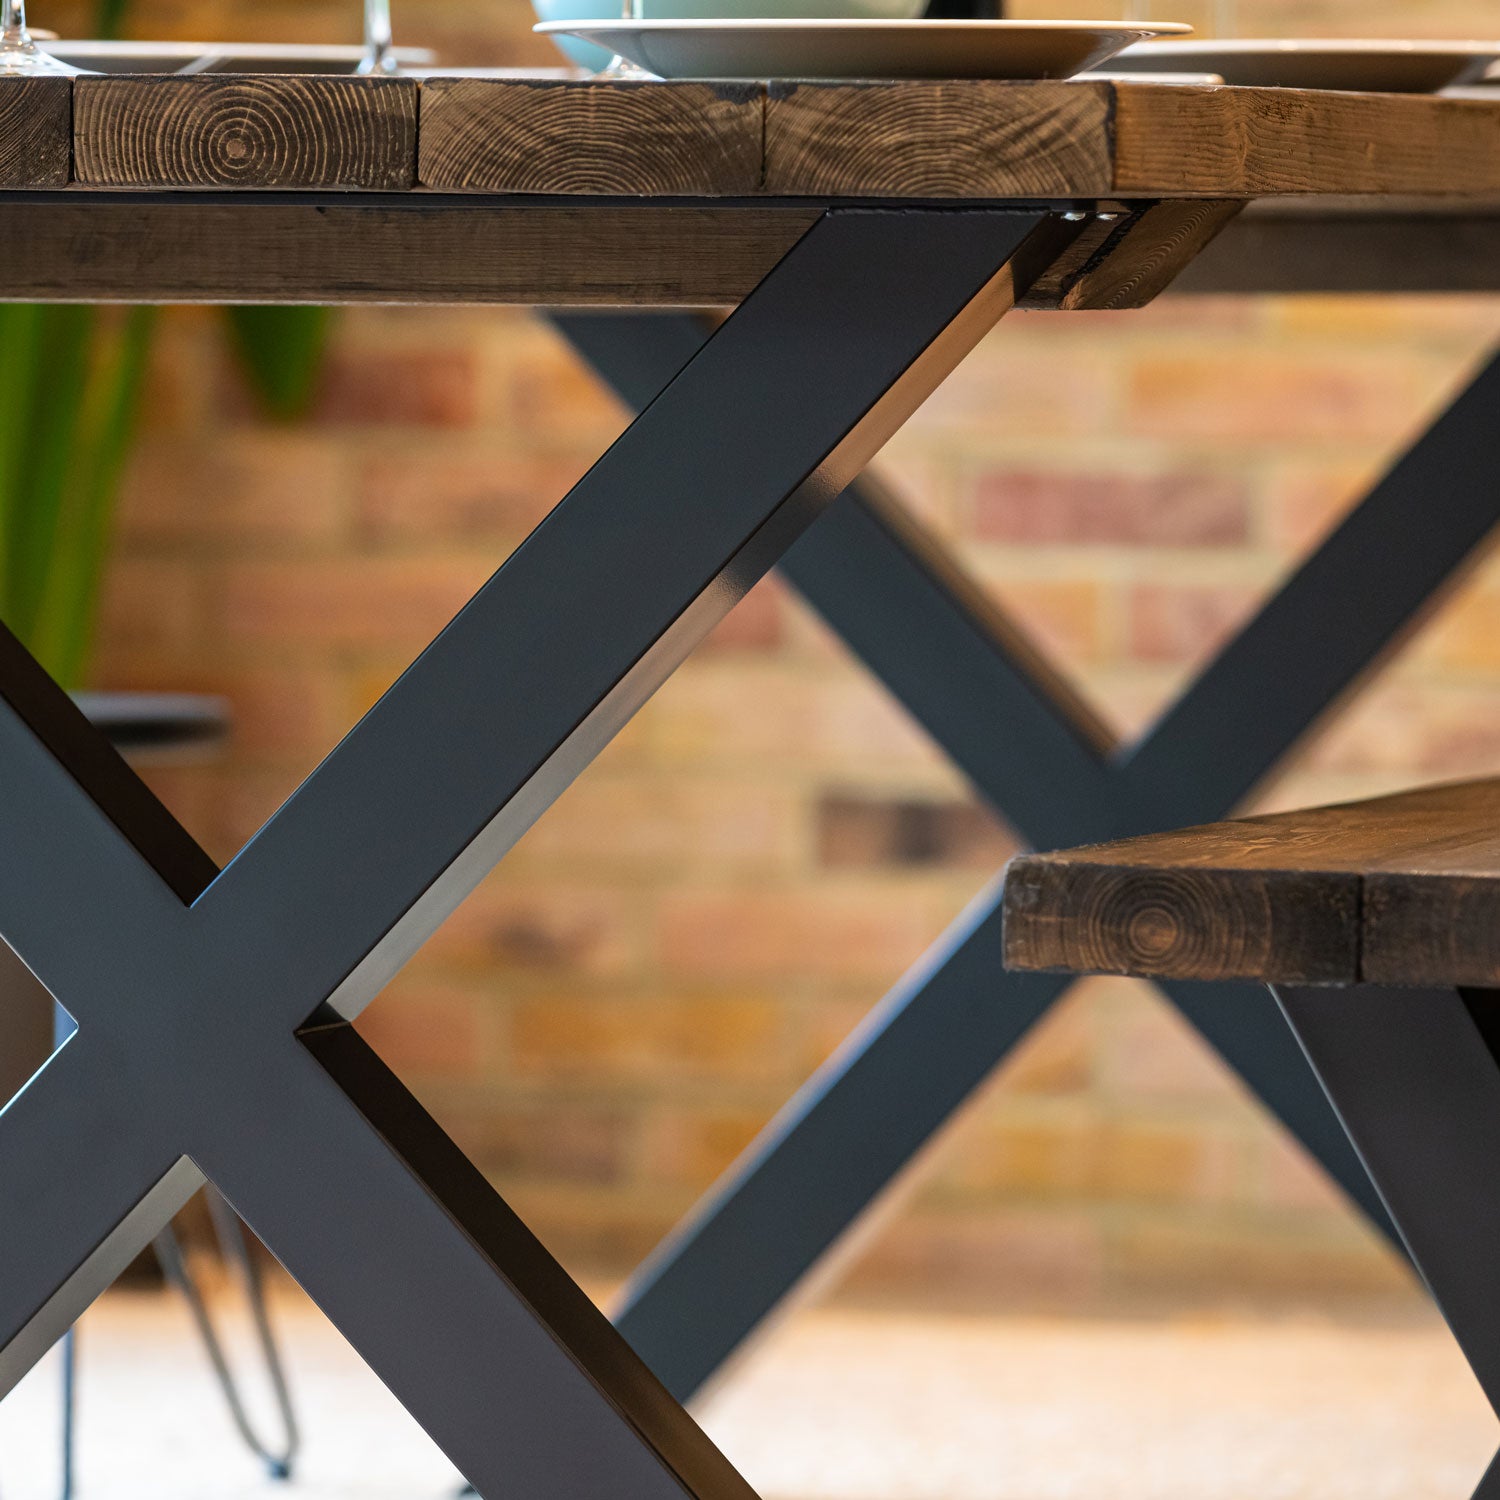 Chunky X-Frame Industrial Legs | 71cm Table Wide